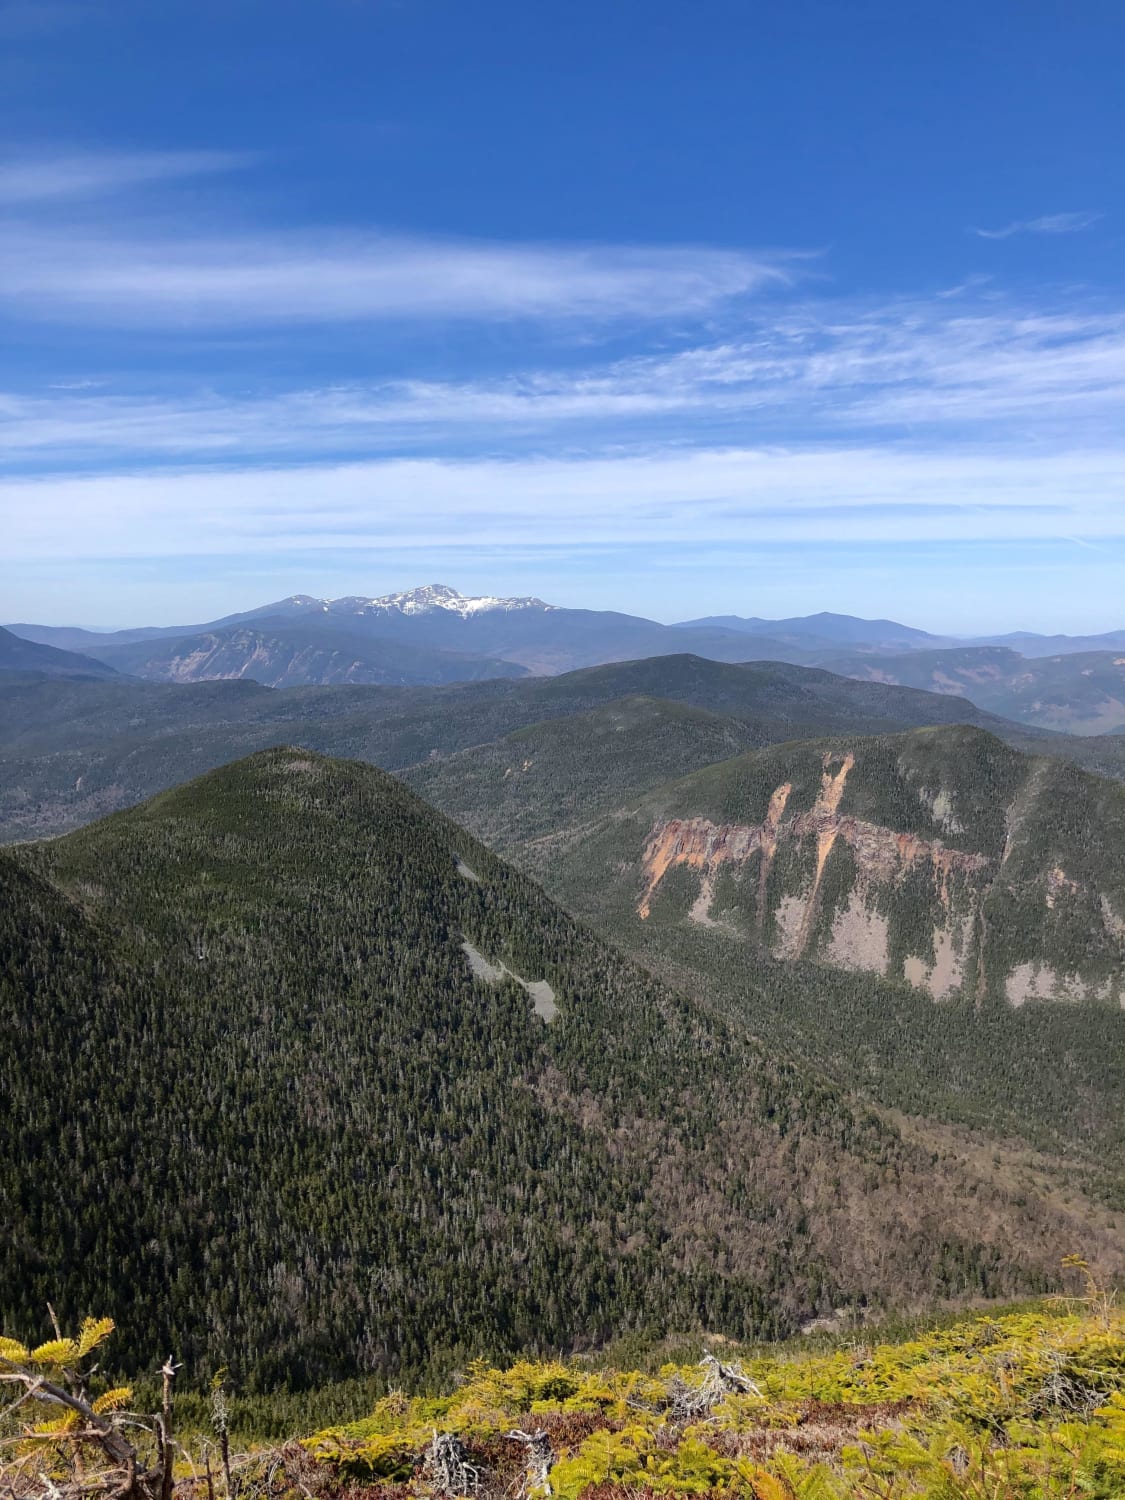 Spring has finally arrived with the White Mountains! View from Signal Ridge en route to Mount Carrigain, NH, USA.